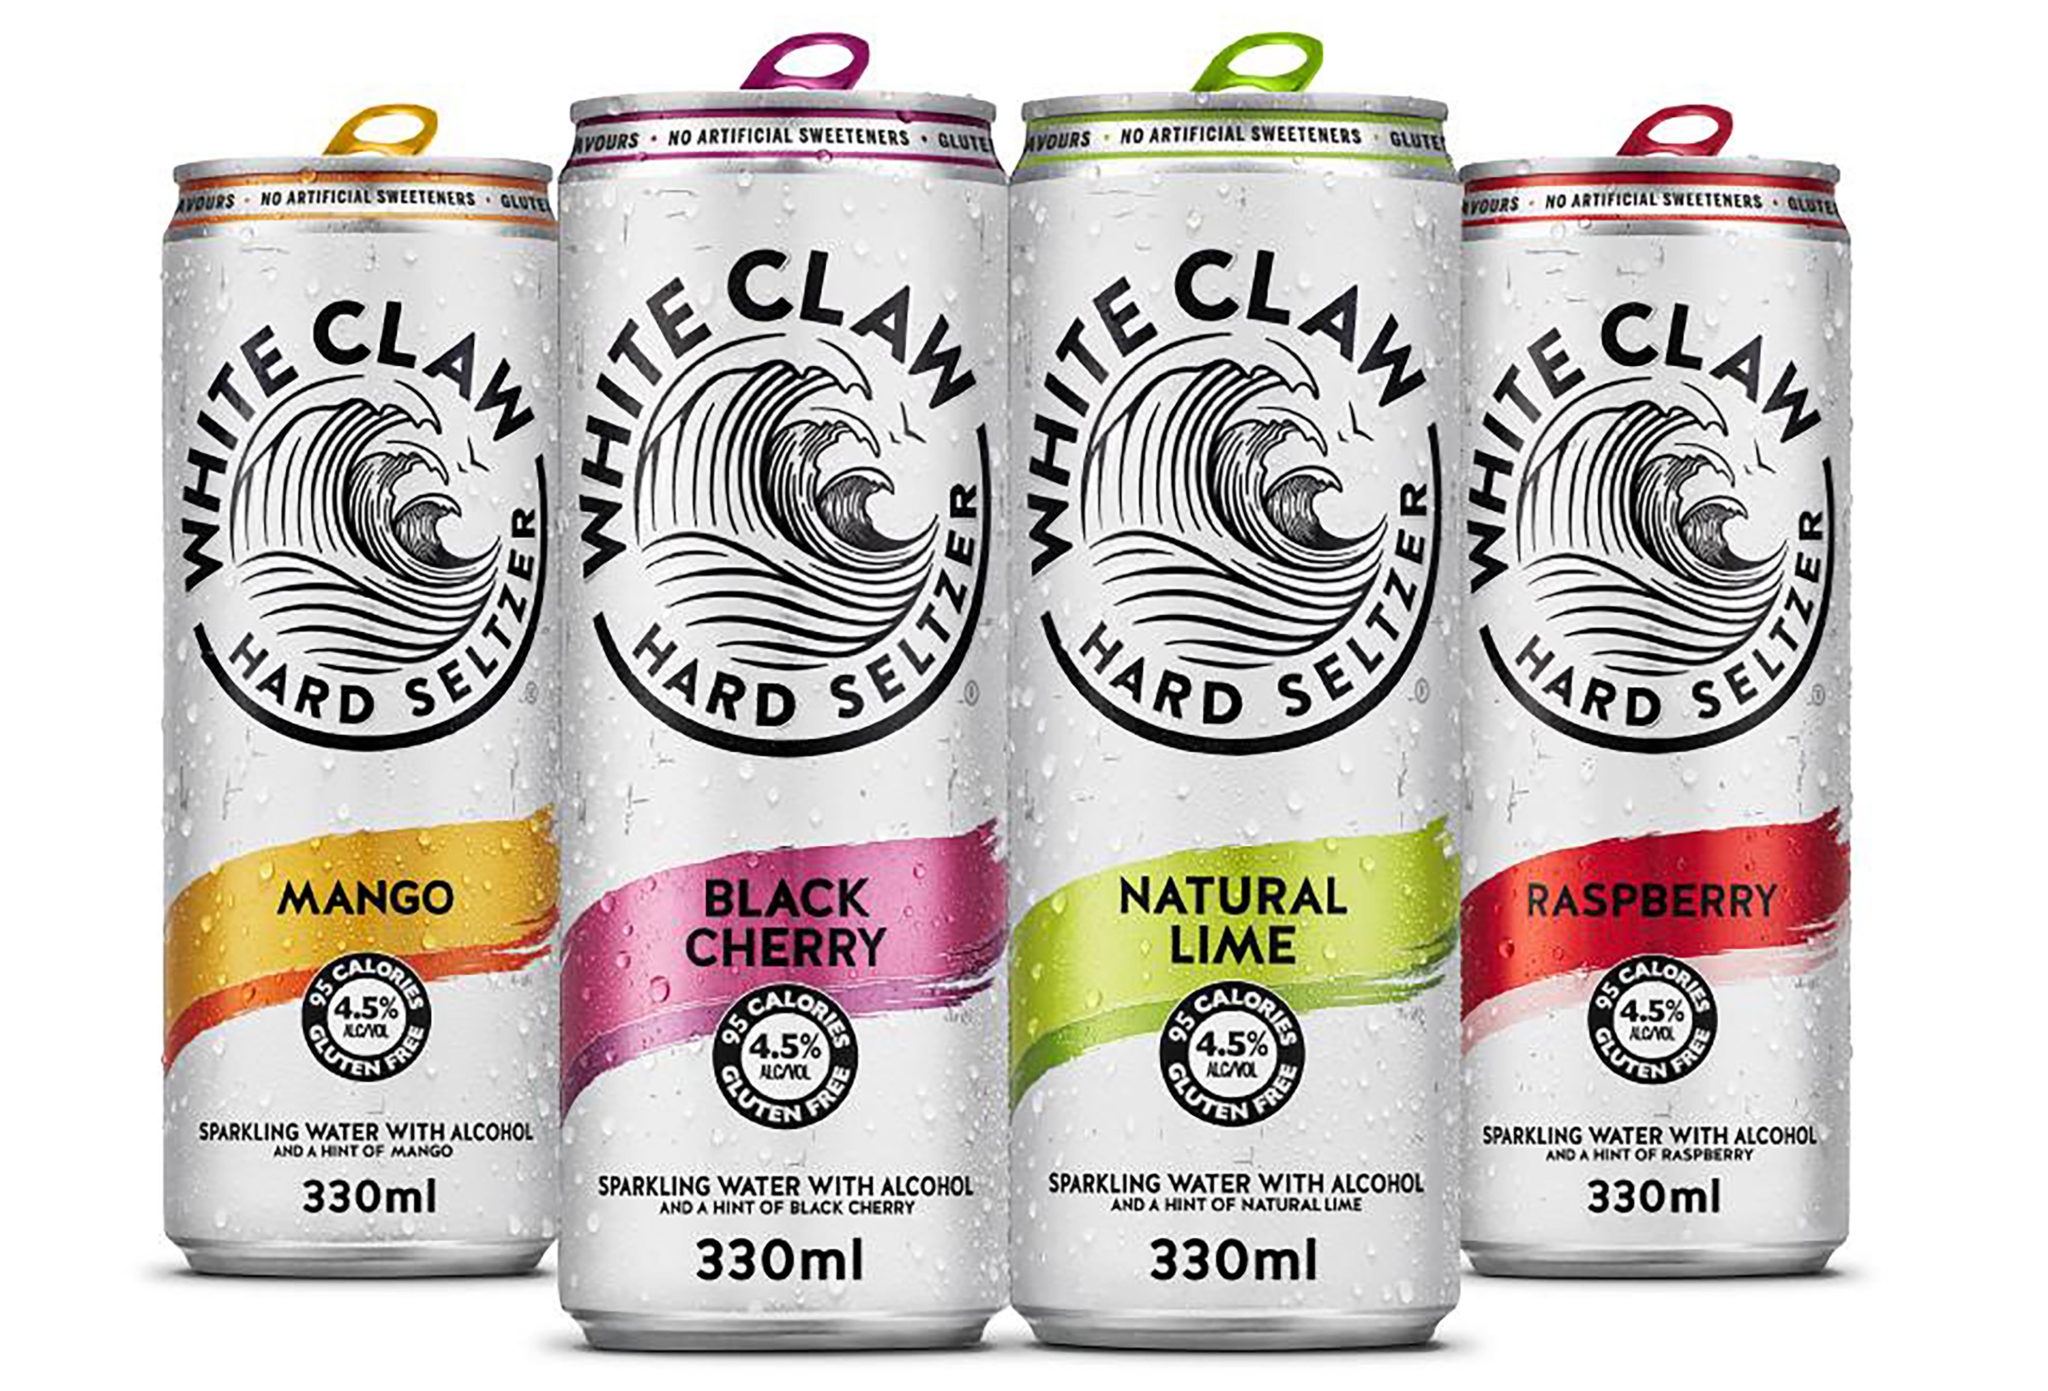 Retailers should consider lower-calorie options to match demands, say bosses for White Claw.